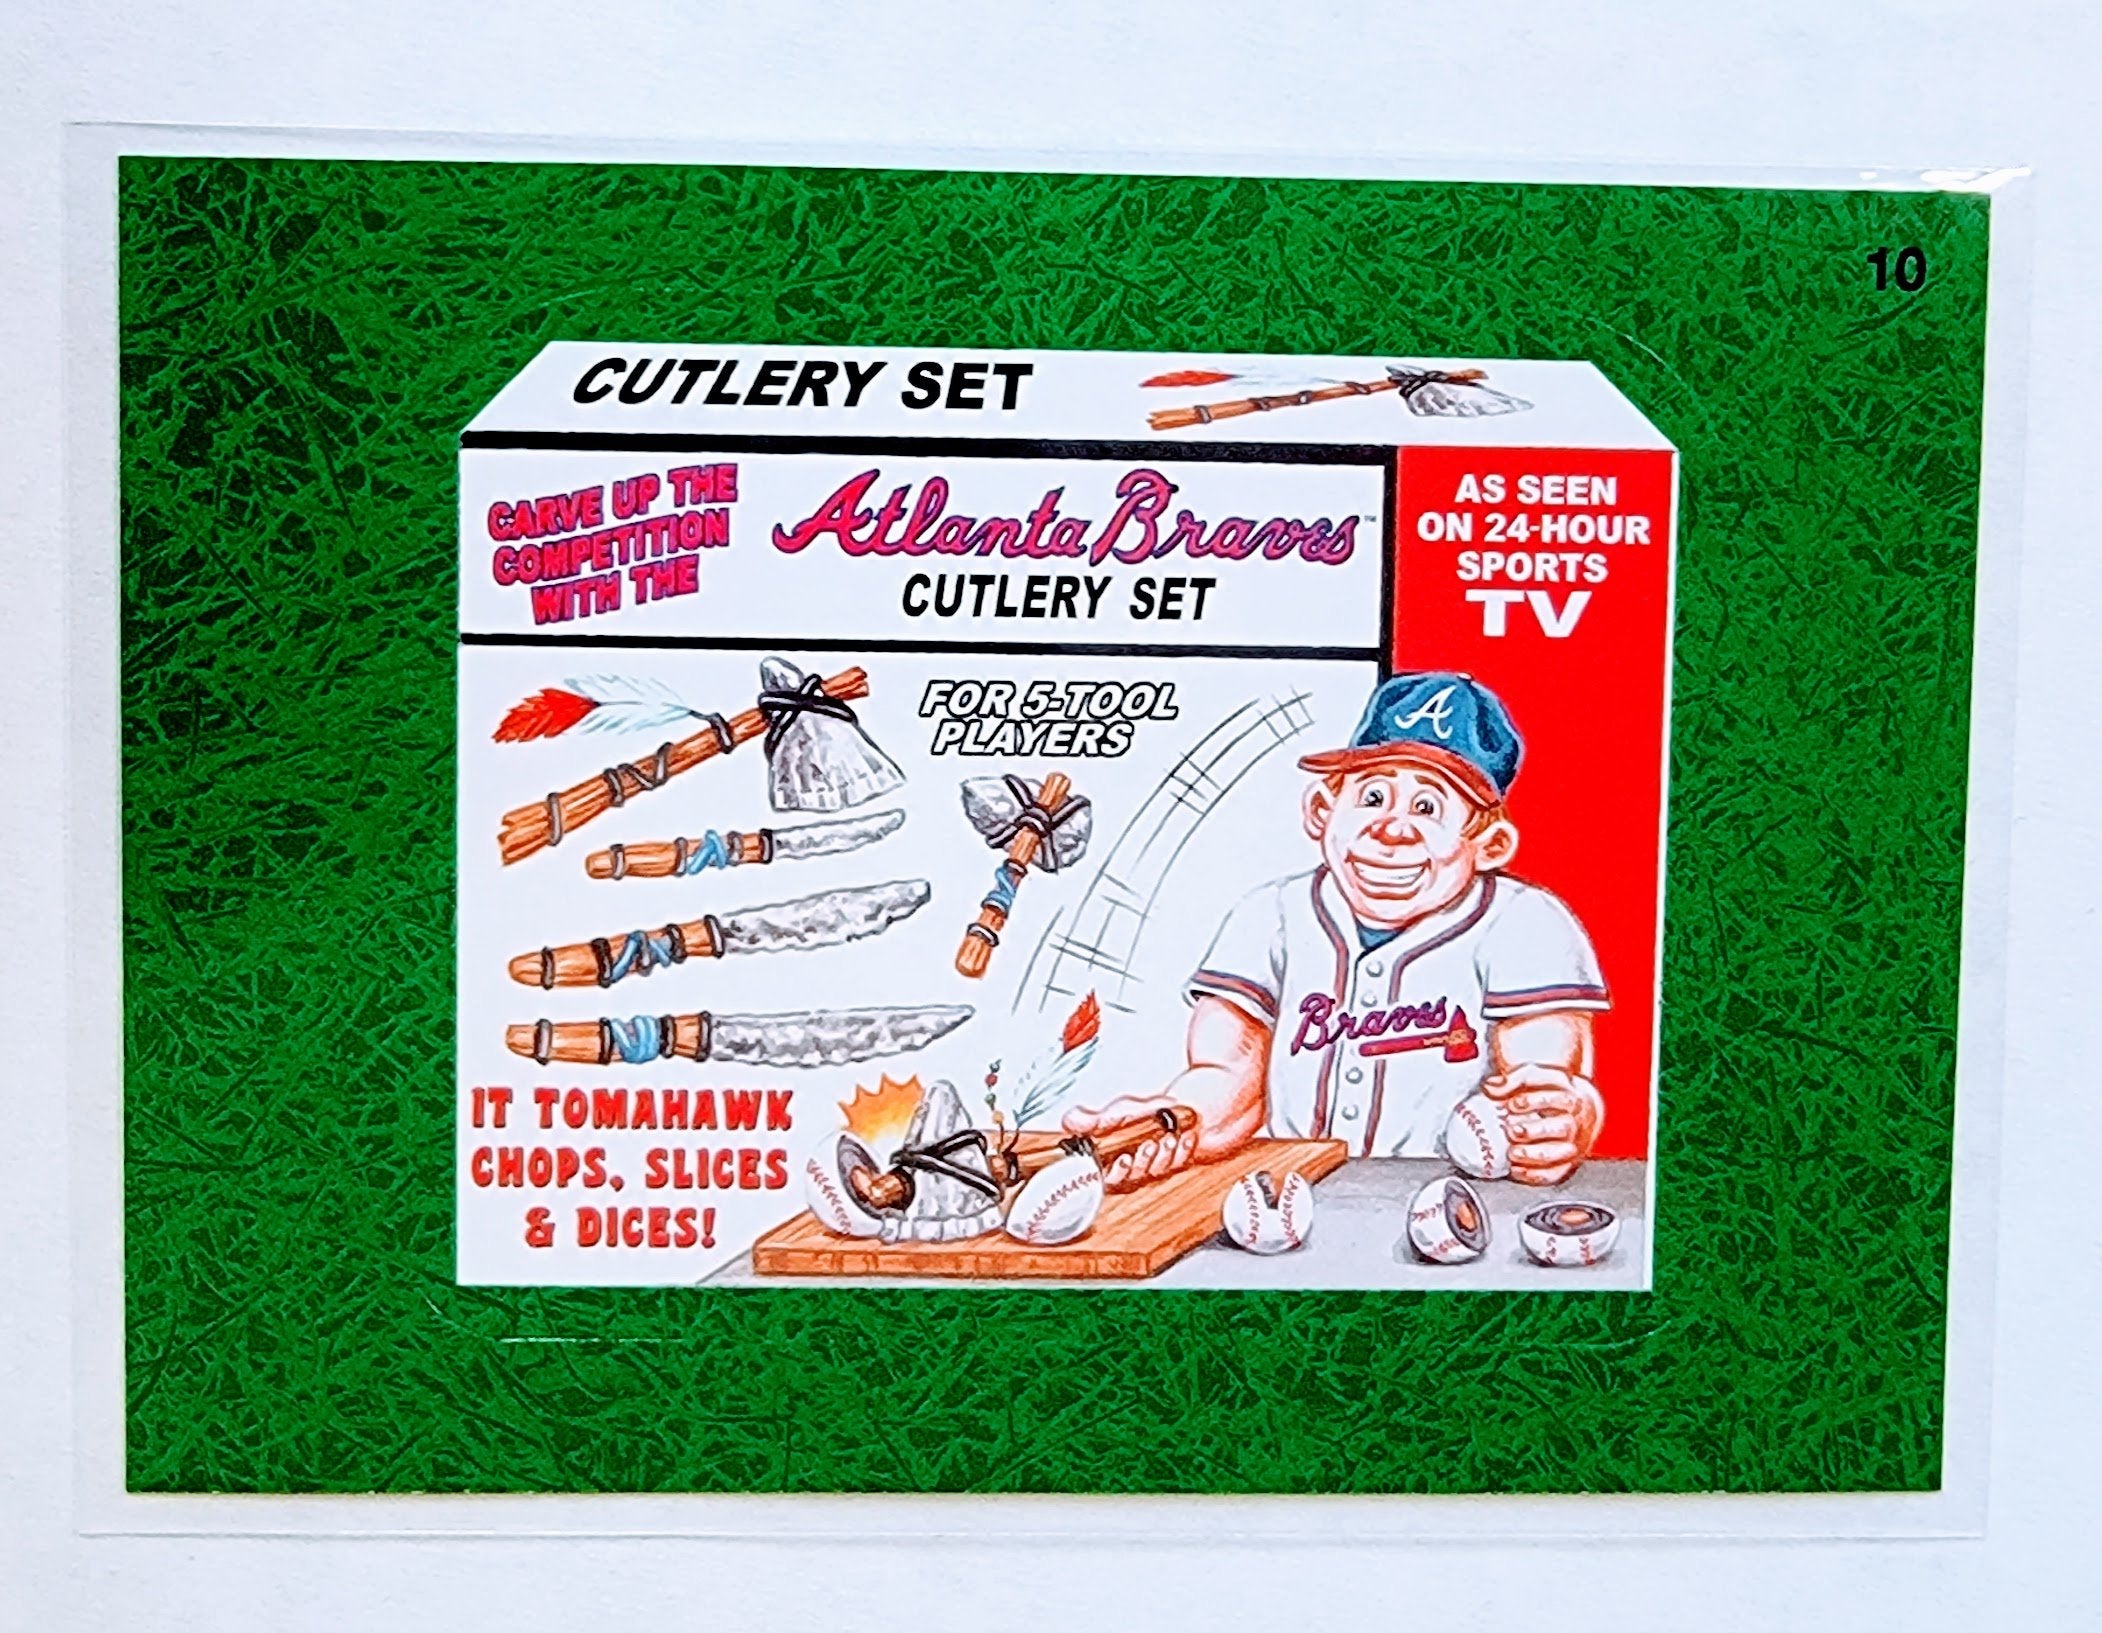 2016 Topps MLB Baseball Wacky Packages Atlanta Braves Cutlery Set Green Grass Parallel Sticker Trading Card MCSC1 simple Xclusive Collectibles   